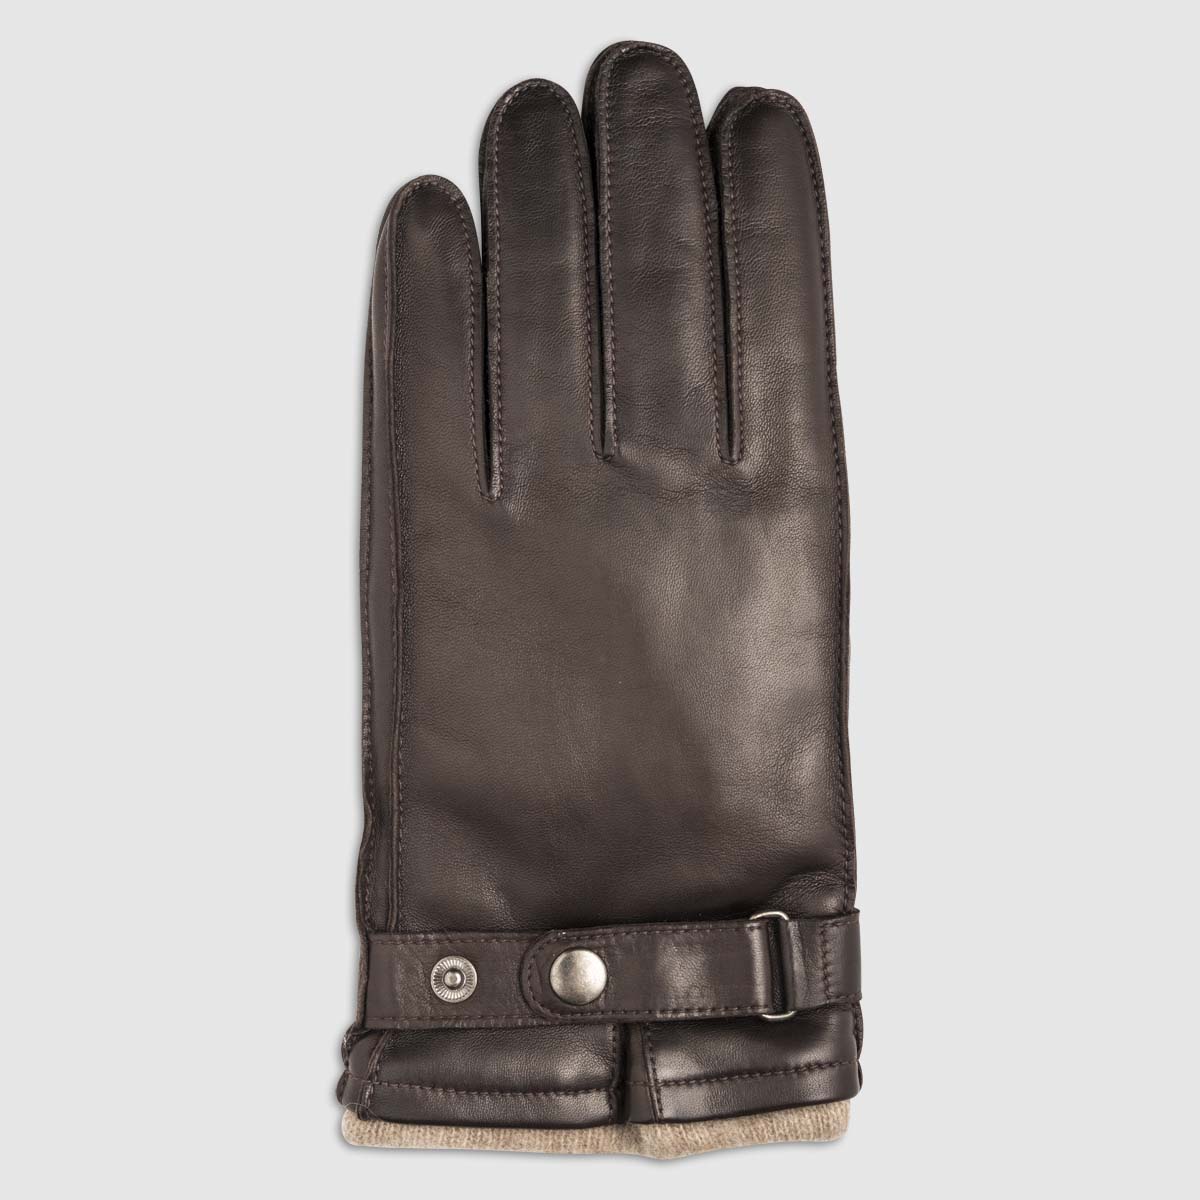 Nappa Leather Glove with Cashmere Lining in Mocca